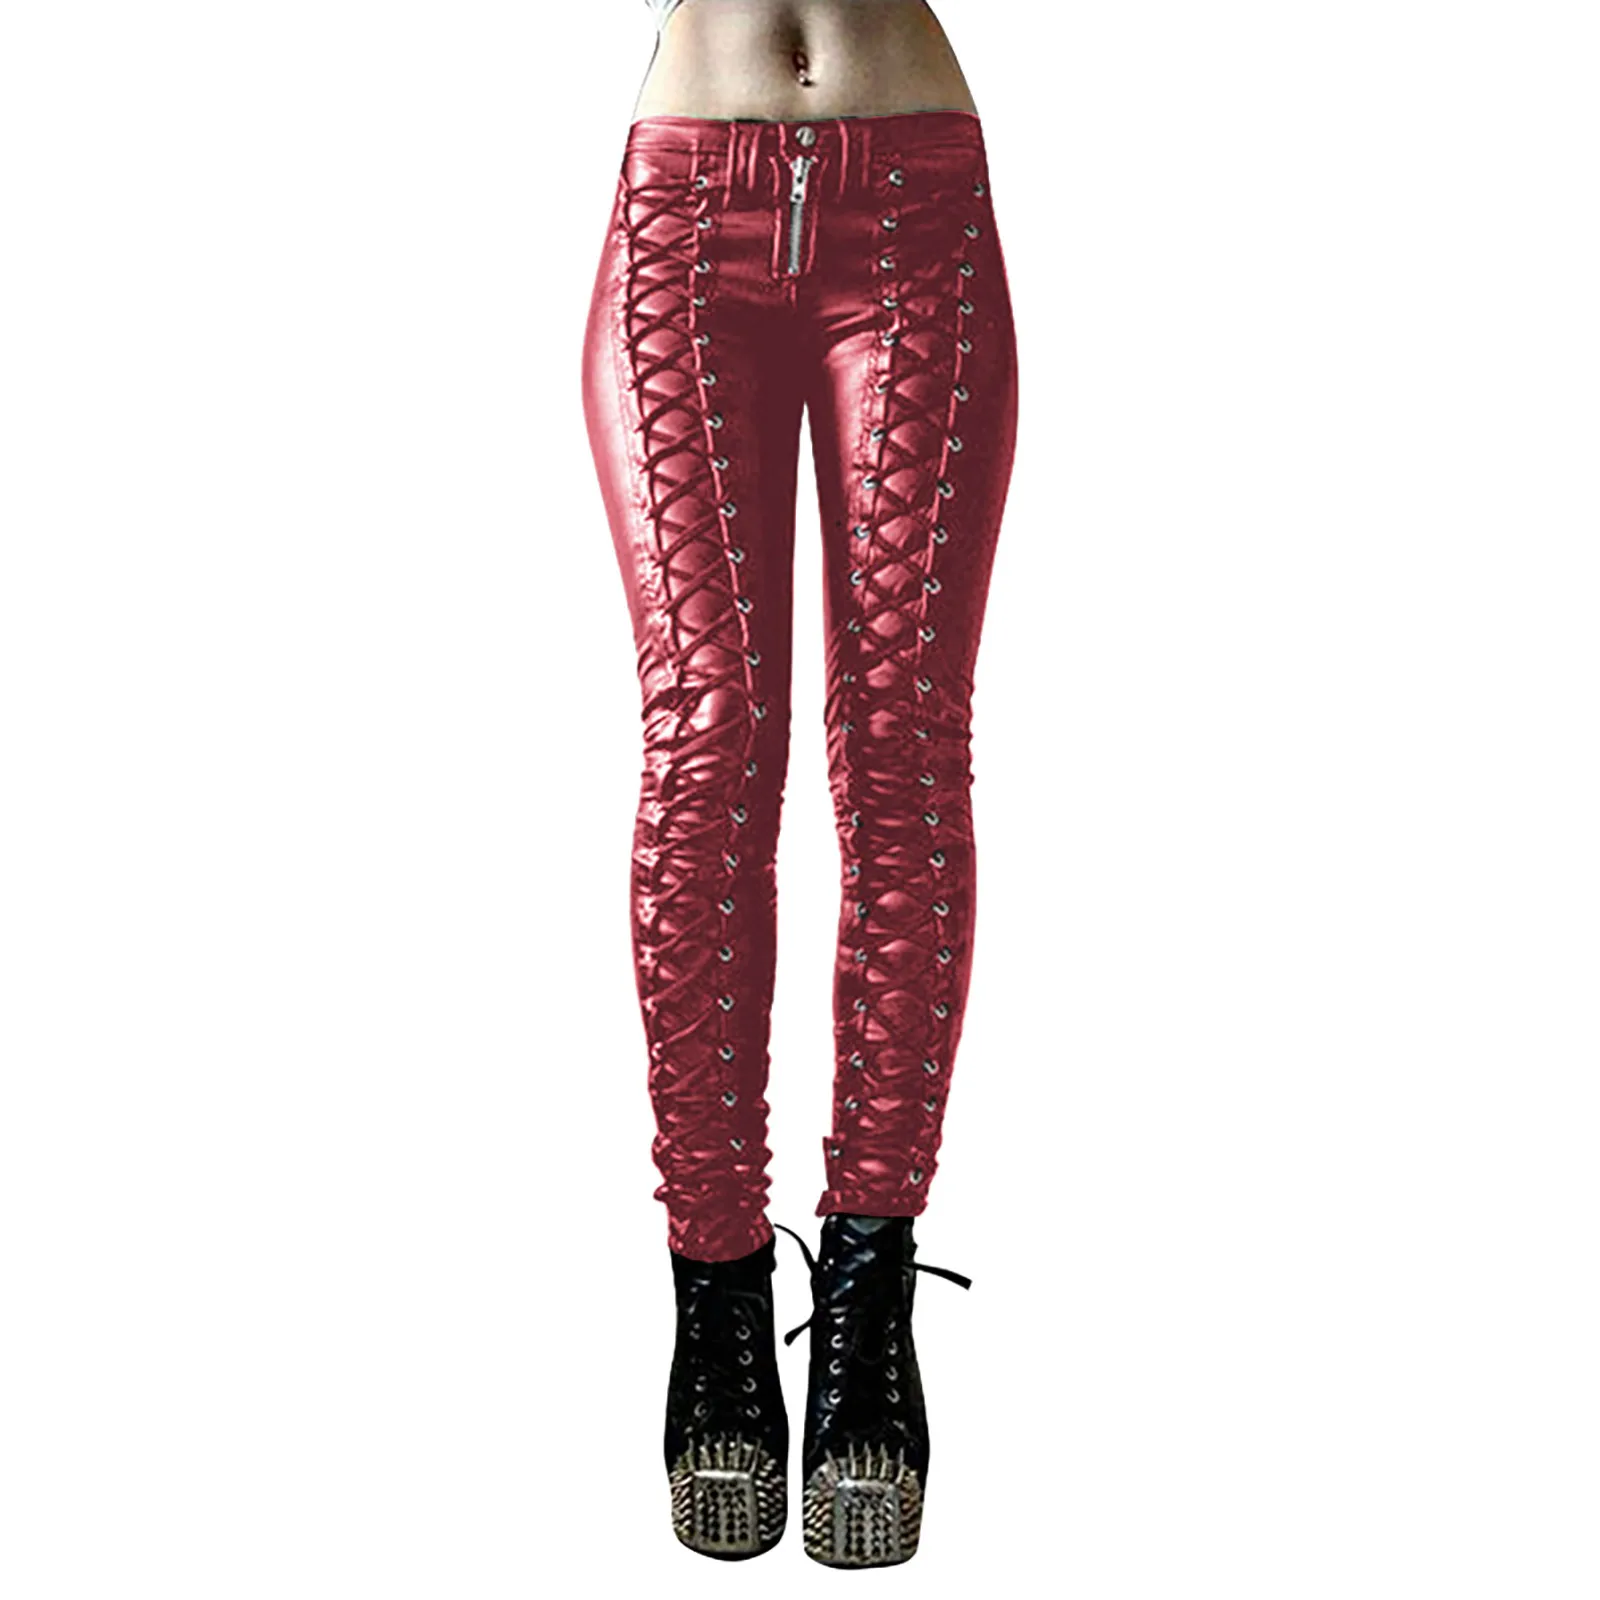 

Y2k Women Retro Pu Leather Pants Steampunk Rivet Lace-Up Pencil Pants Skinny Trousers Streetwear Casual Bottoming